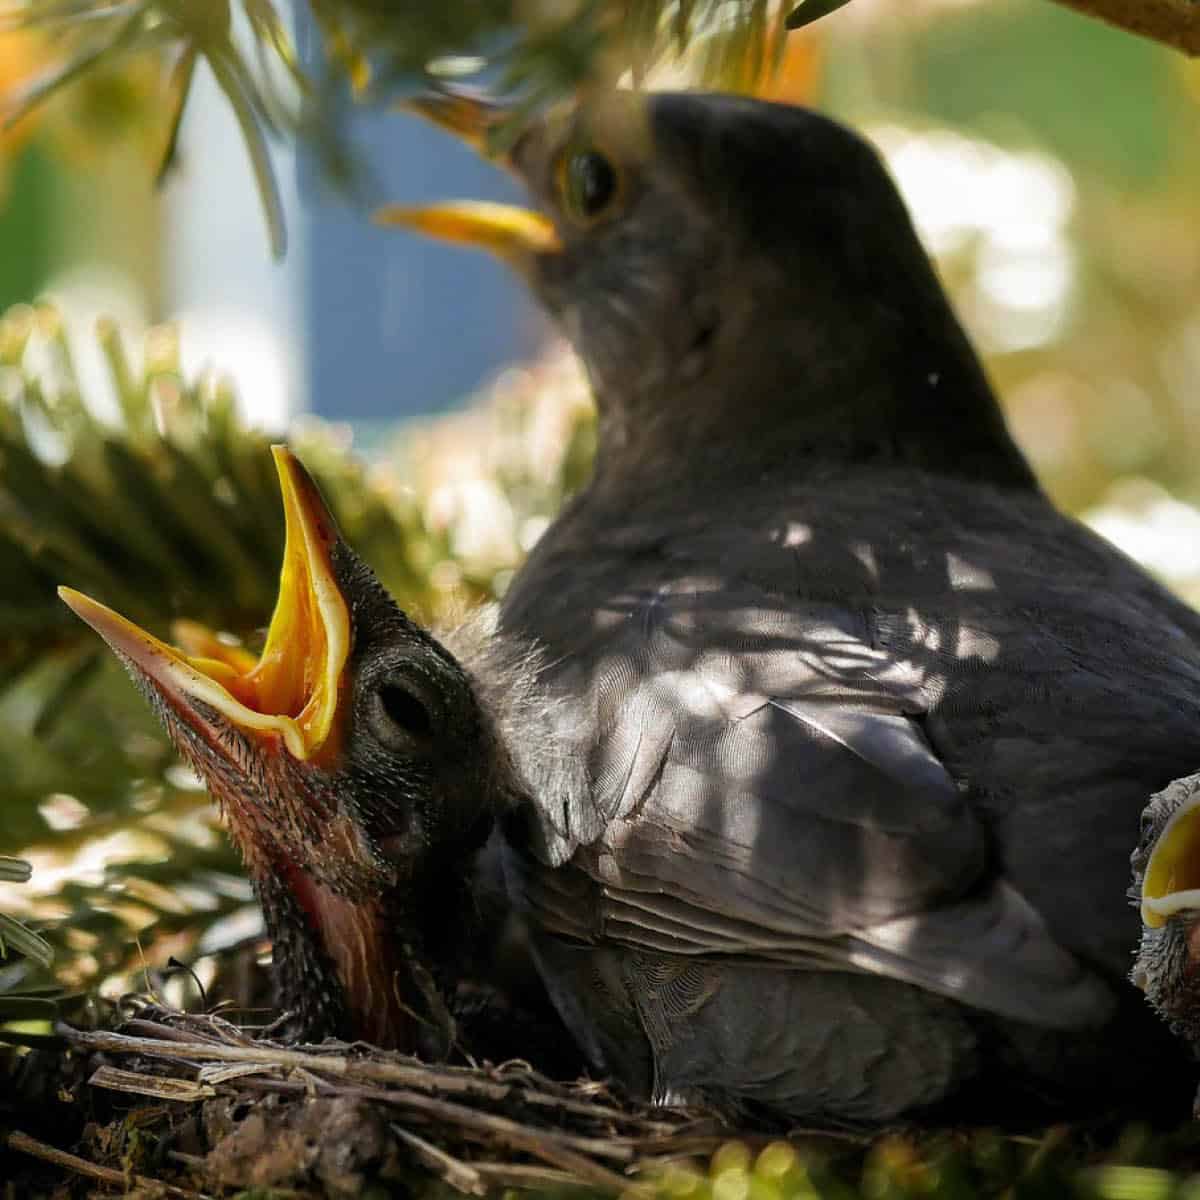 Nesting Mother with Baby Birds